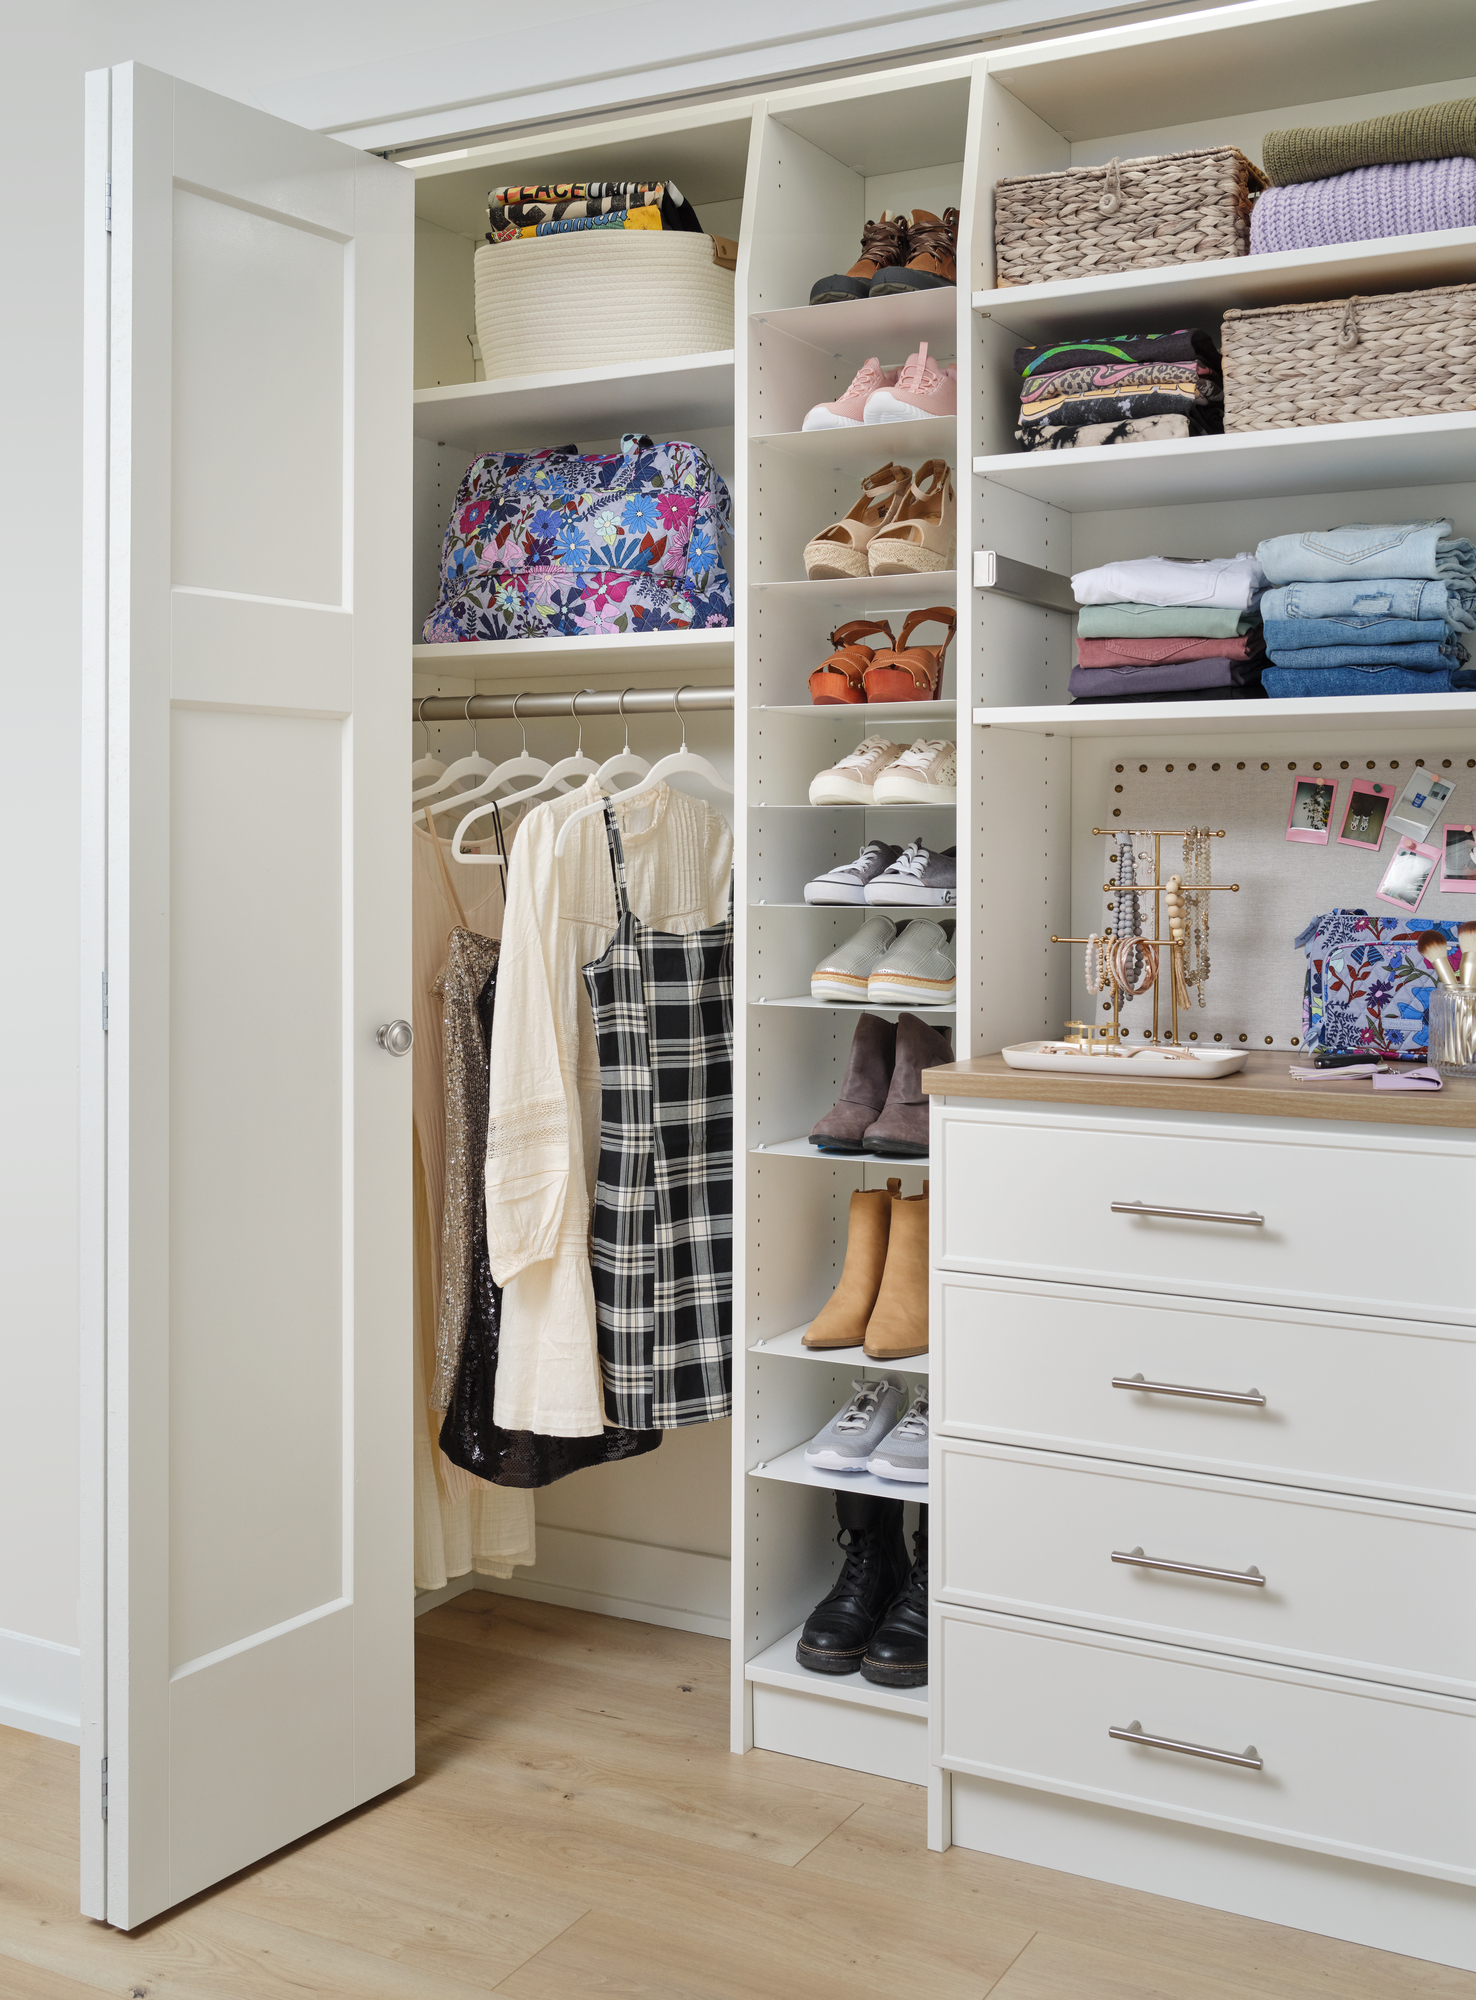 White reach-in closet with storage for baskets from Inspired Closets